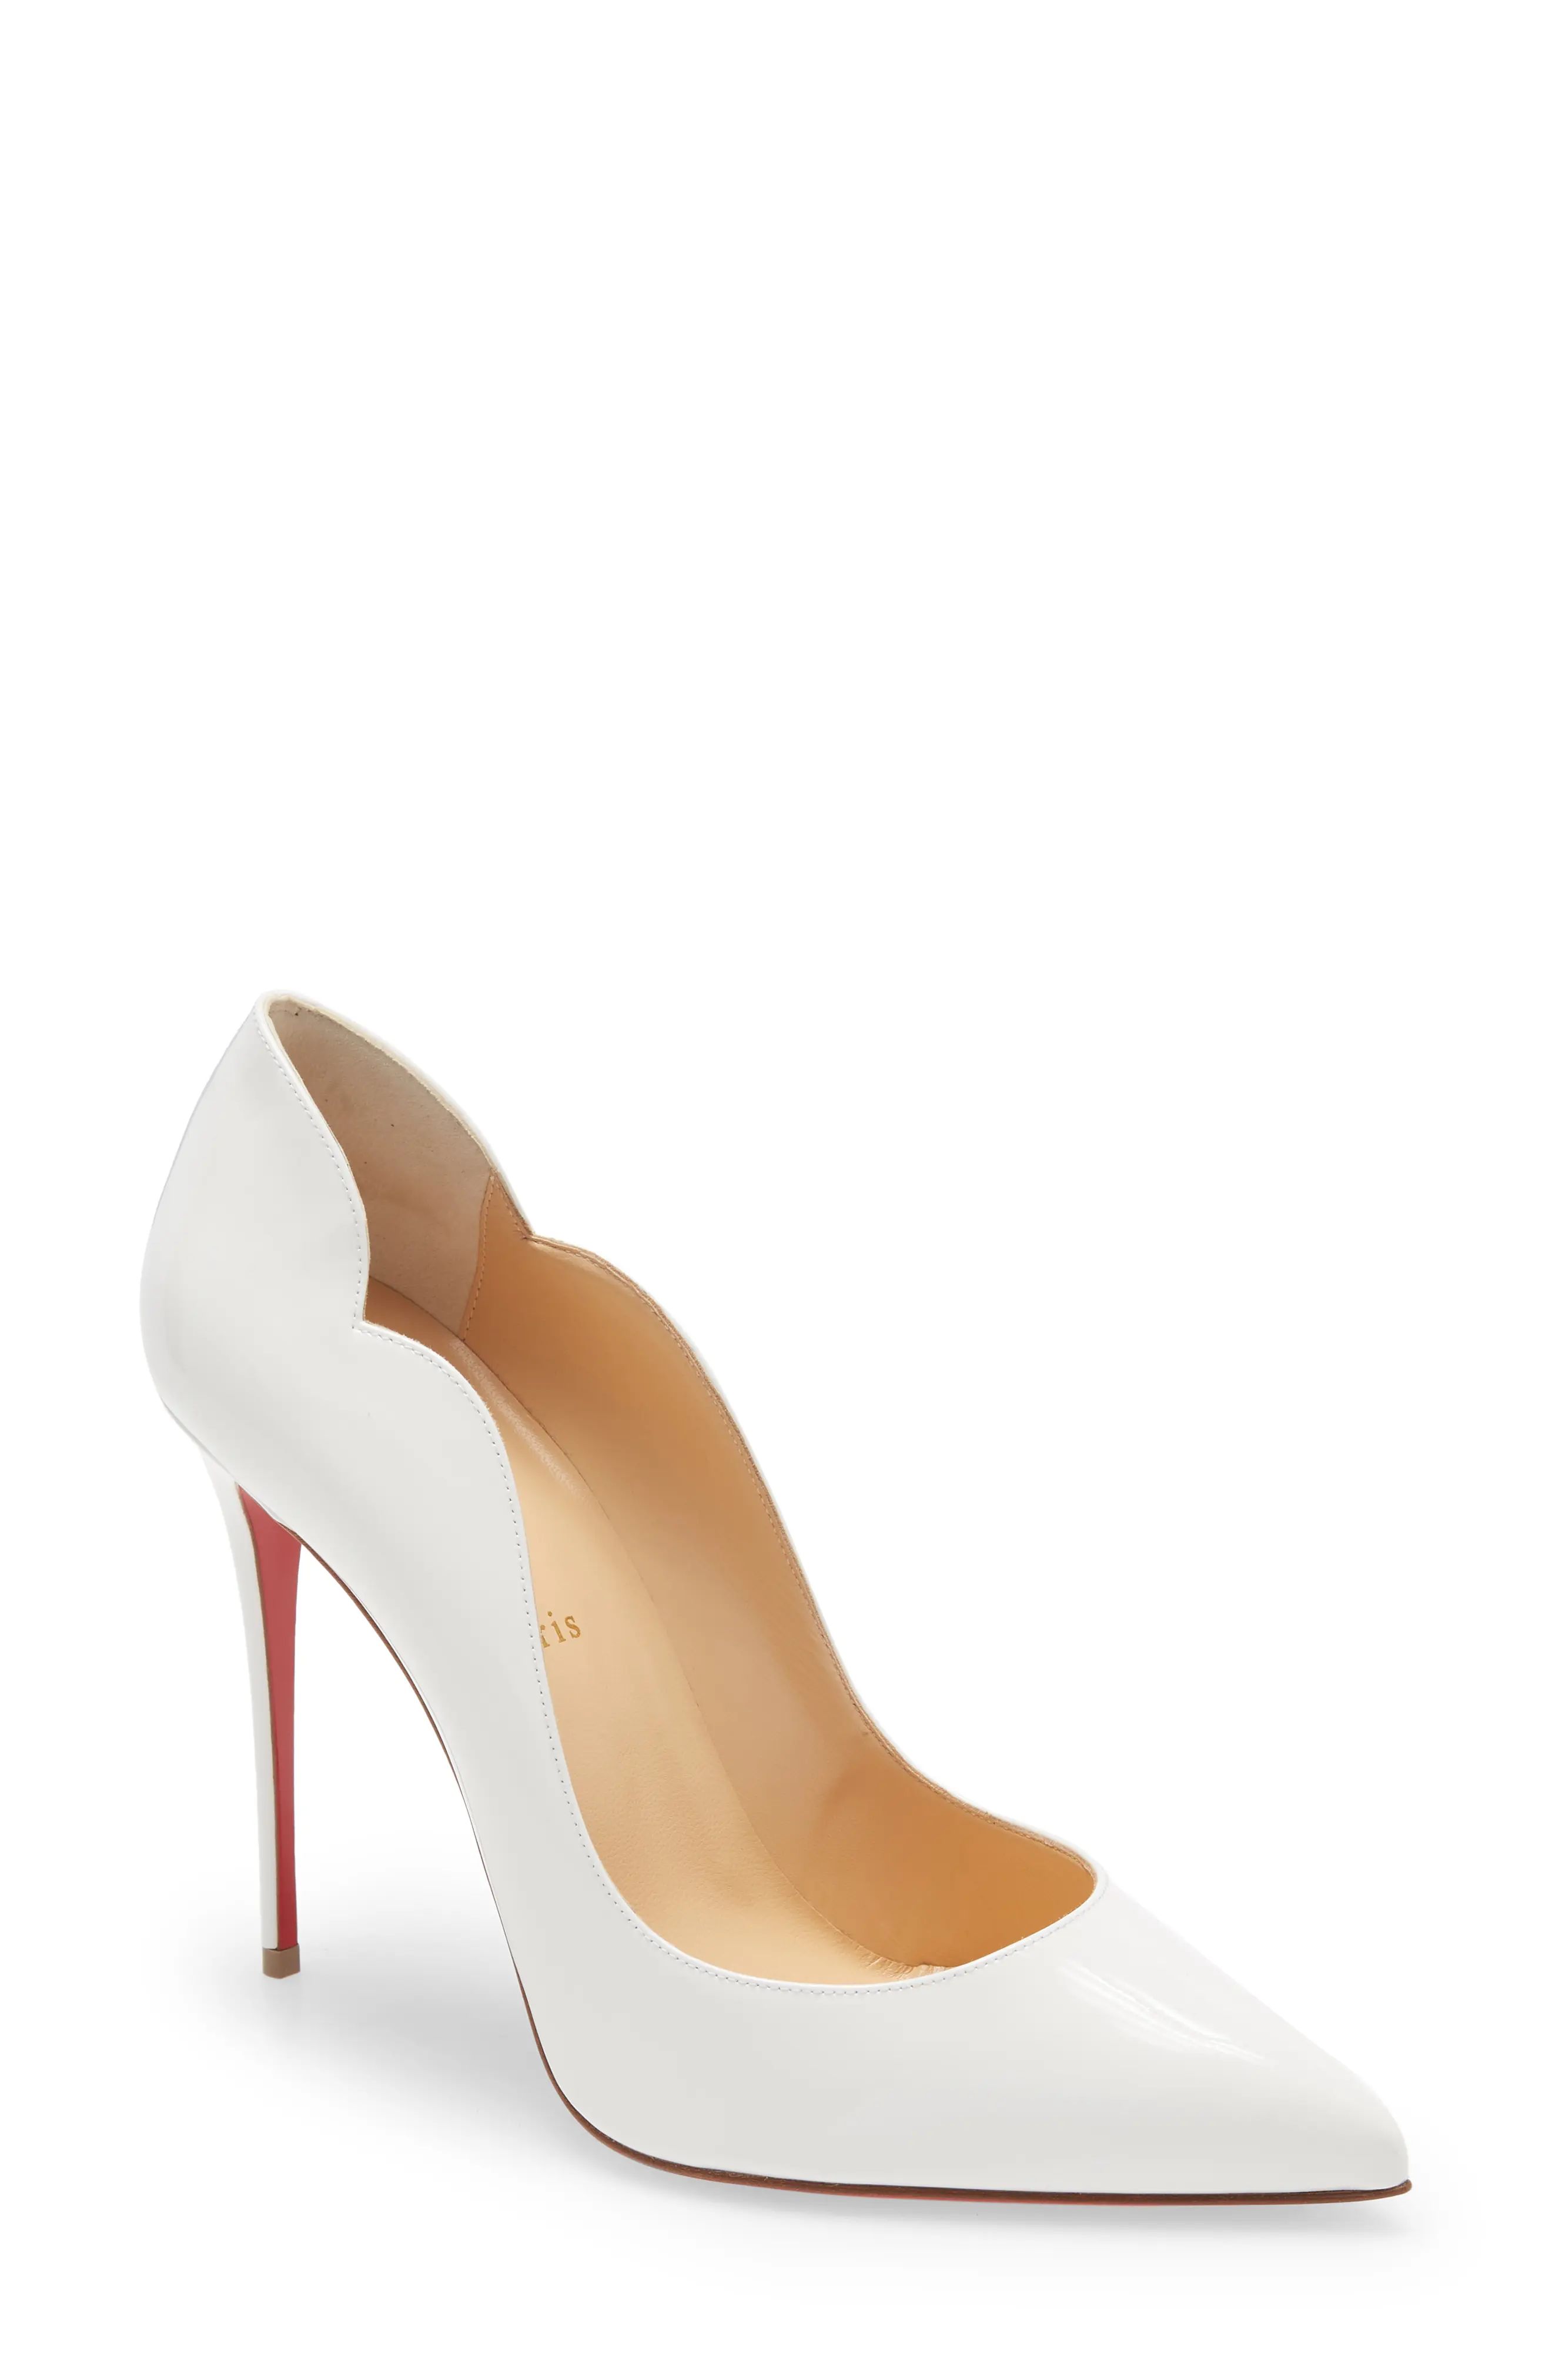 Christian Louboutin Hot Chick Scallop Pointed Toe Pump, Size 7Us in White at Nordstrom | Nordstrom